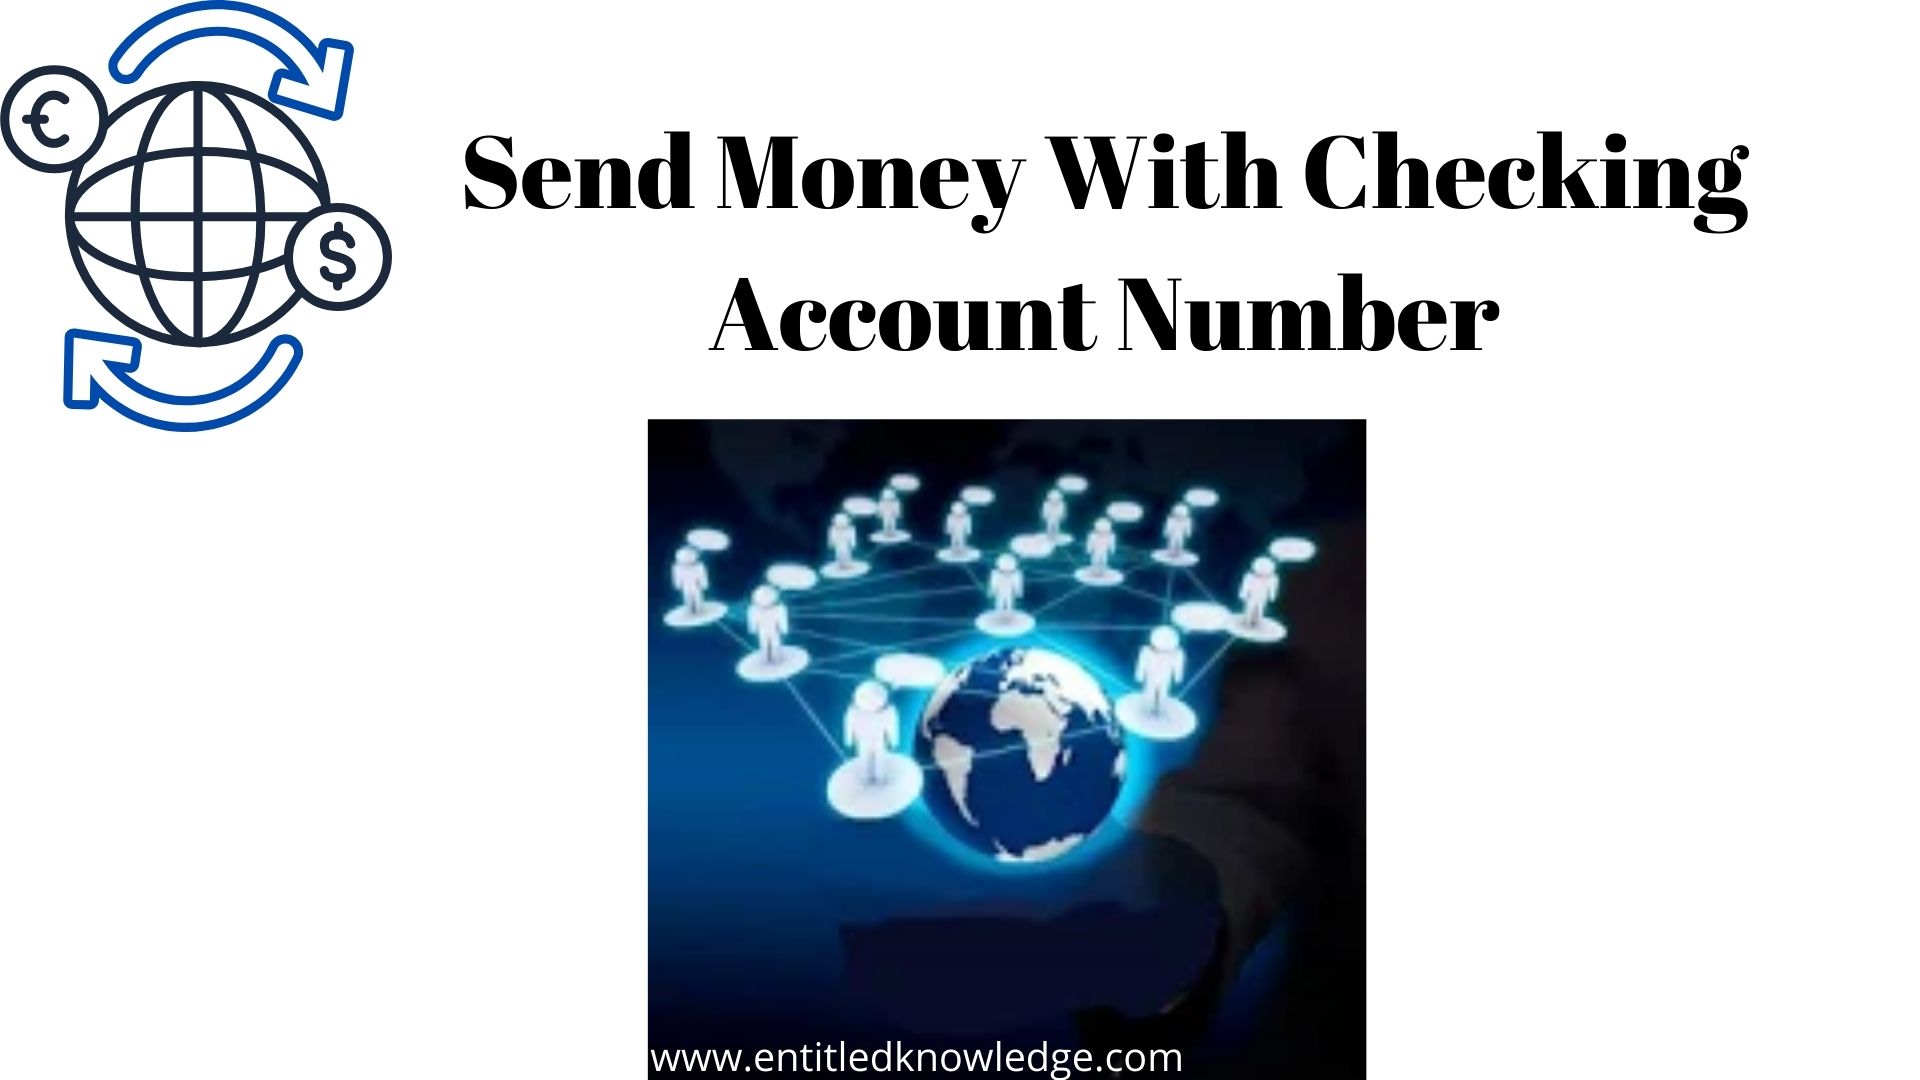 Send Money With Checking Account Number Instantly